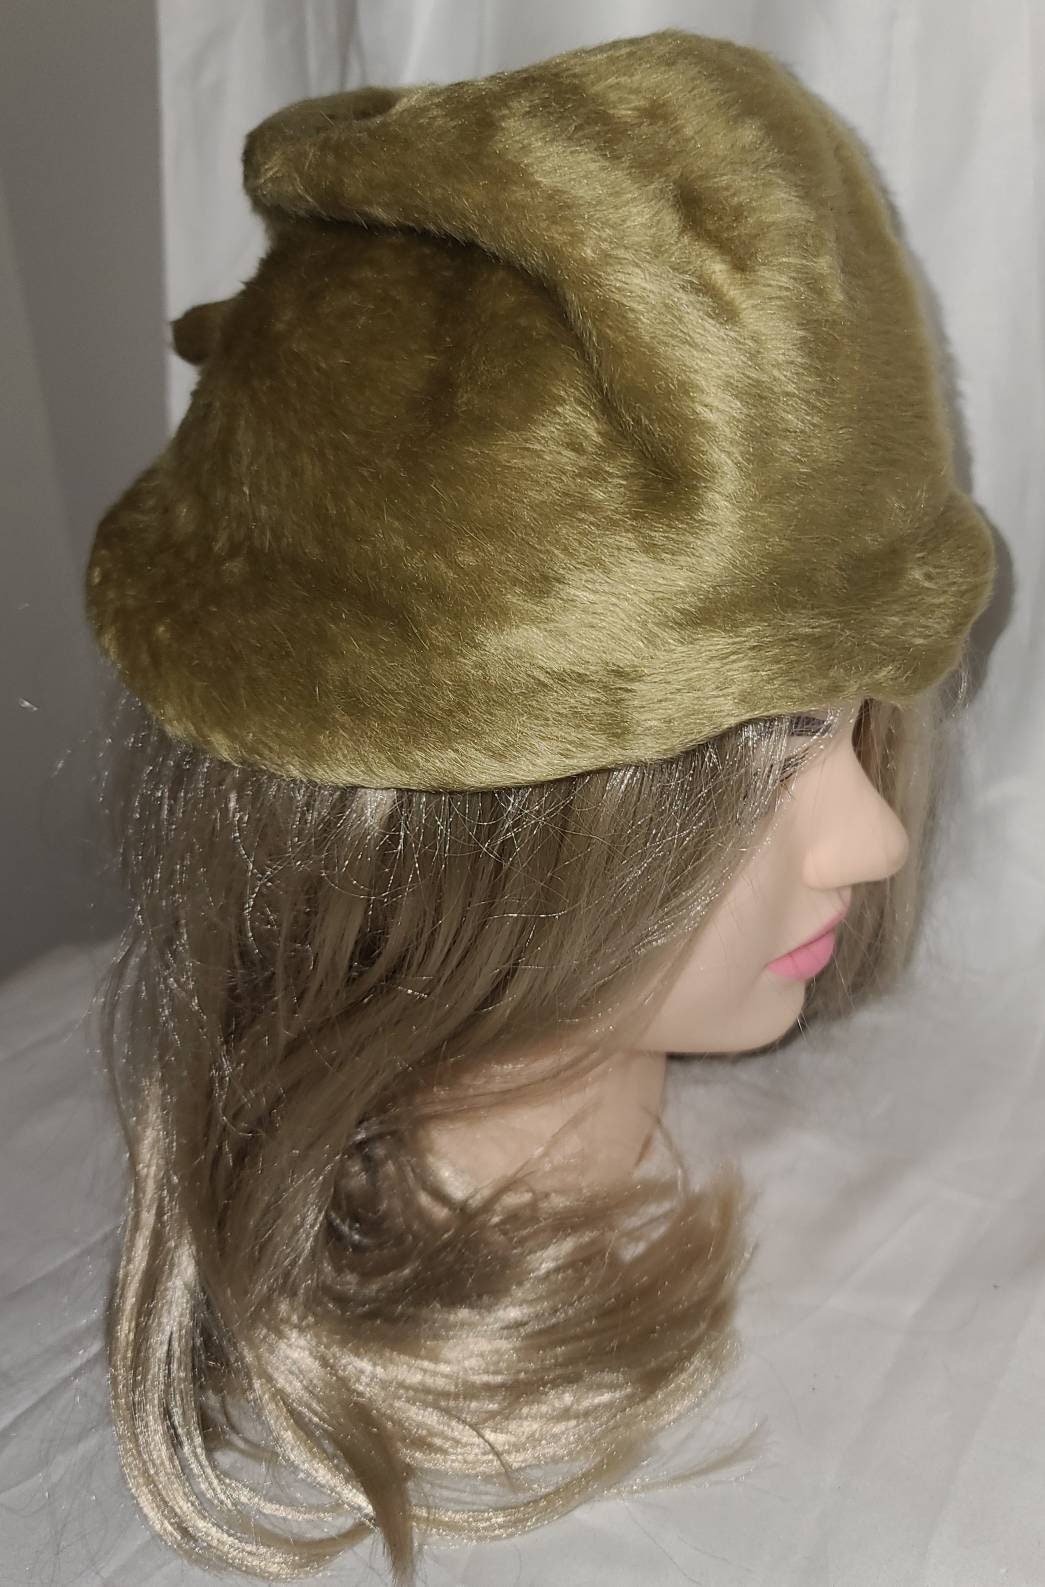 SALE Vintage Sculptural Hat 1950s 60s Chartreuse Green Furry Faux Fur Hat Large Back Loop Abstract German Rockabilly Mod  21.5 in.